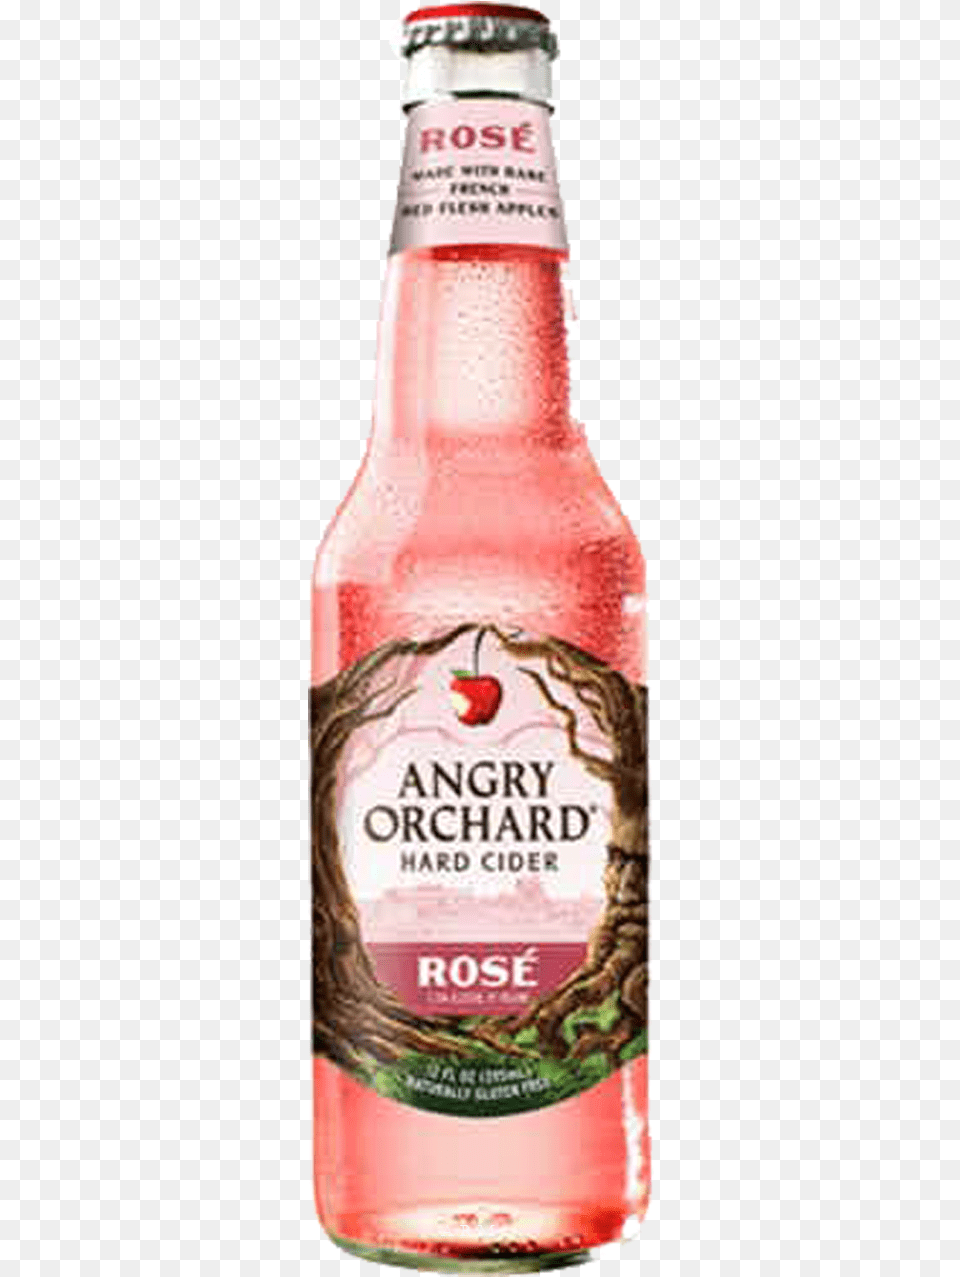 Angry Orchard Logo, Alcohol, Beer, Beverage, Bottle Png Image